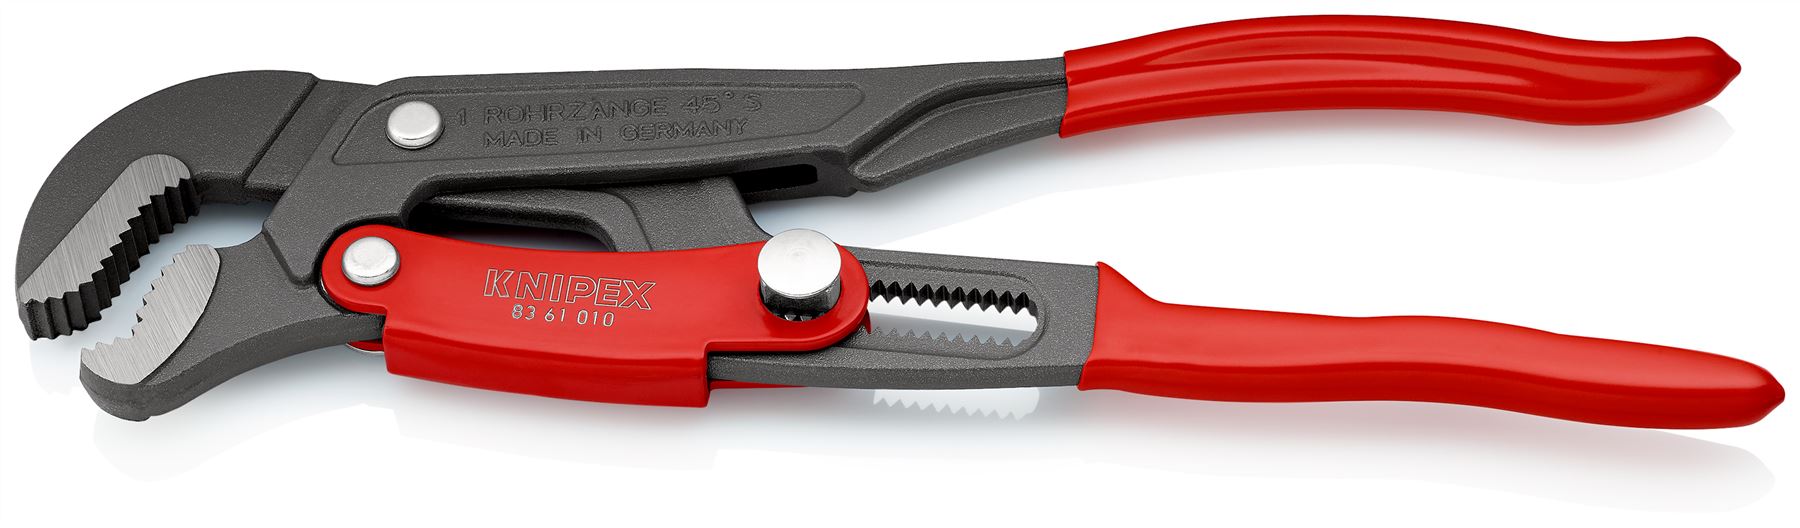 KNIPEX Pipe Wrench S-Type with Fast Adjustment 330mm Grey Powder Coated Plastic Coated Handles 83 61 010